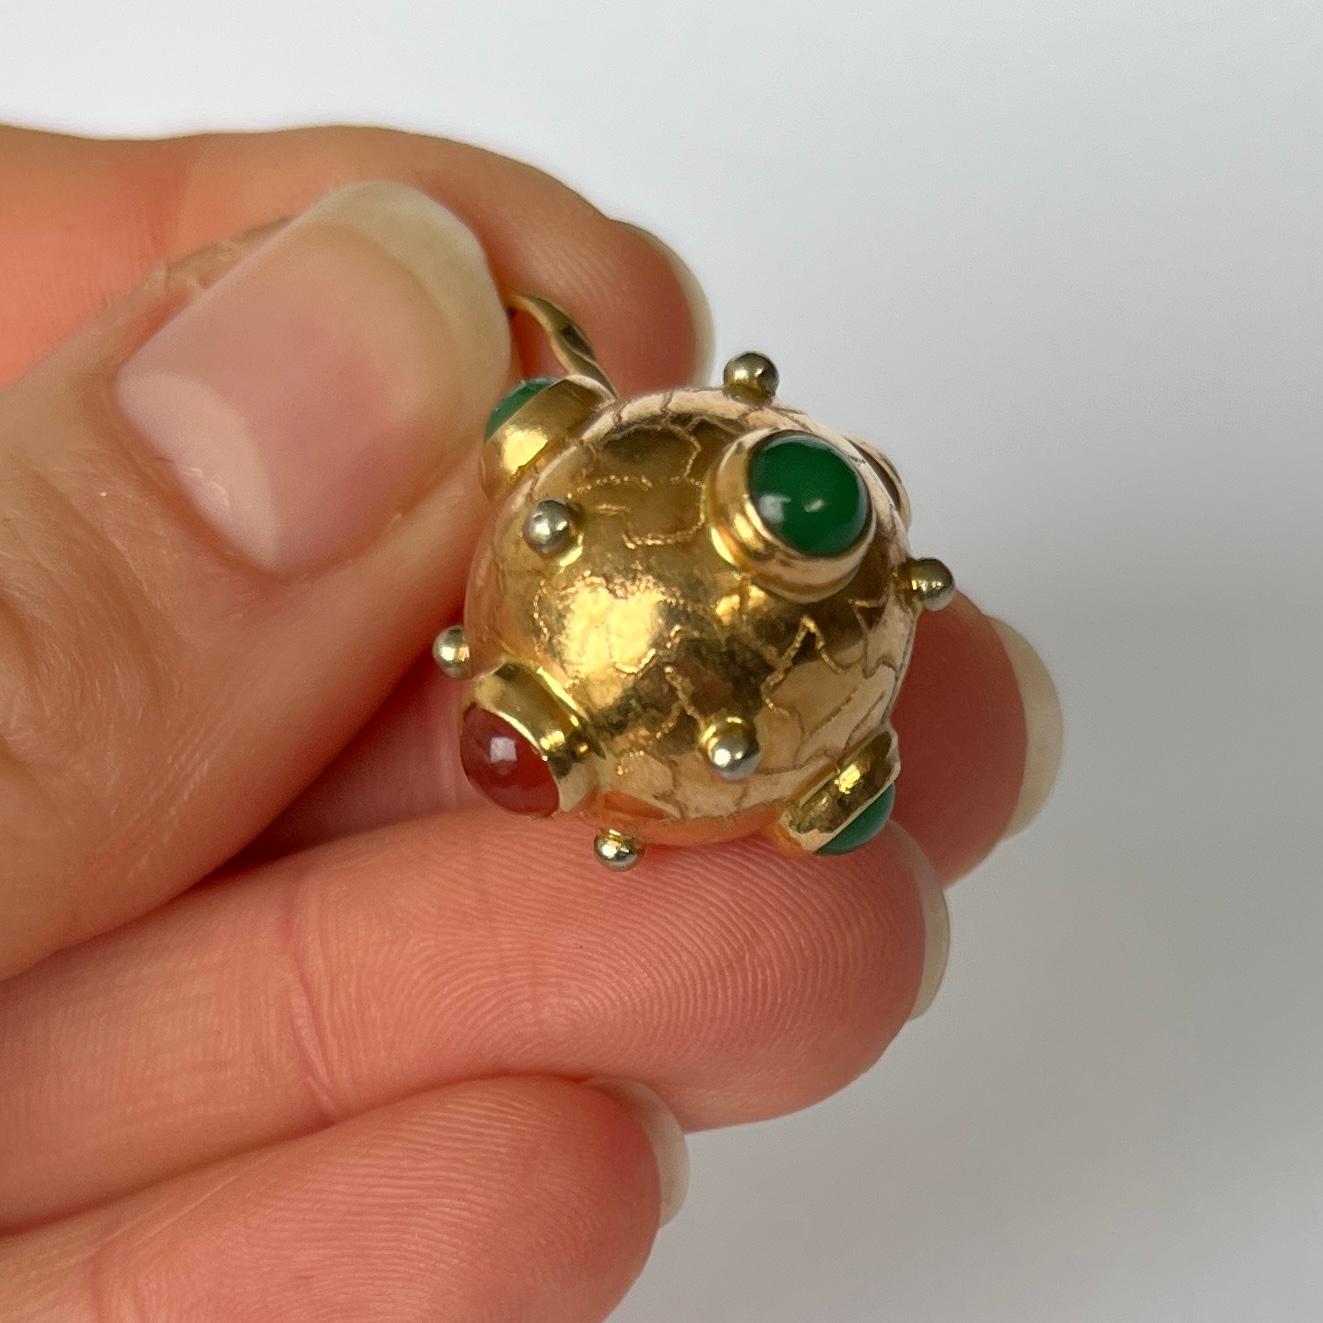 This pendant is modelled in 9 carat gold and is set with carnelian and jadeite. Each stone measures 4.5mm in diameter. 

Pendant drop from loop: 30mm

Weight: 5.4g